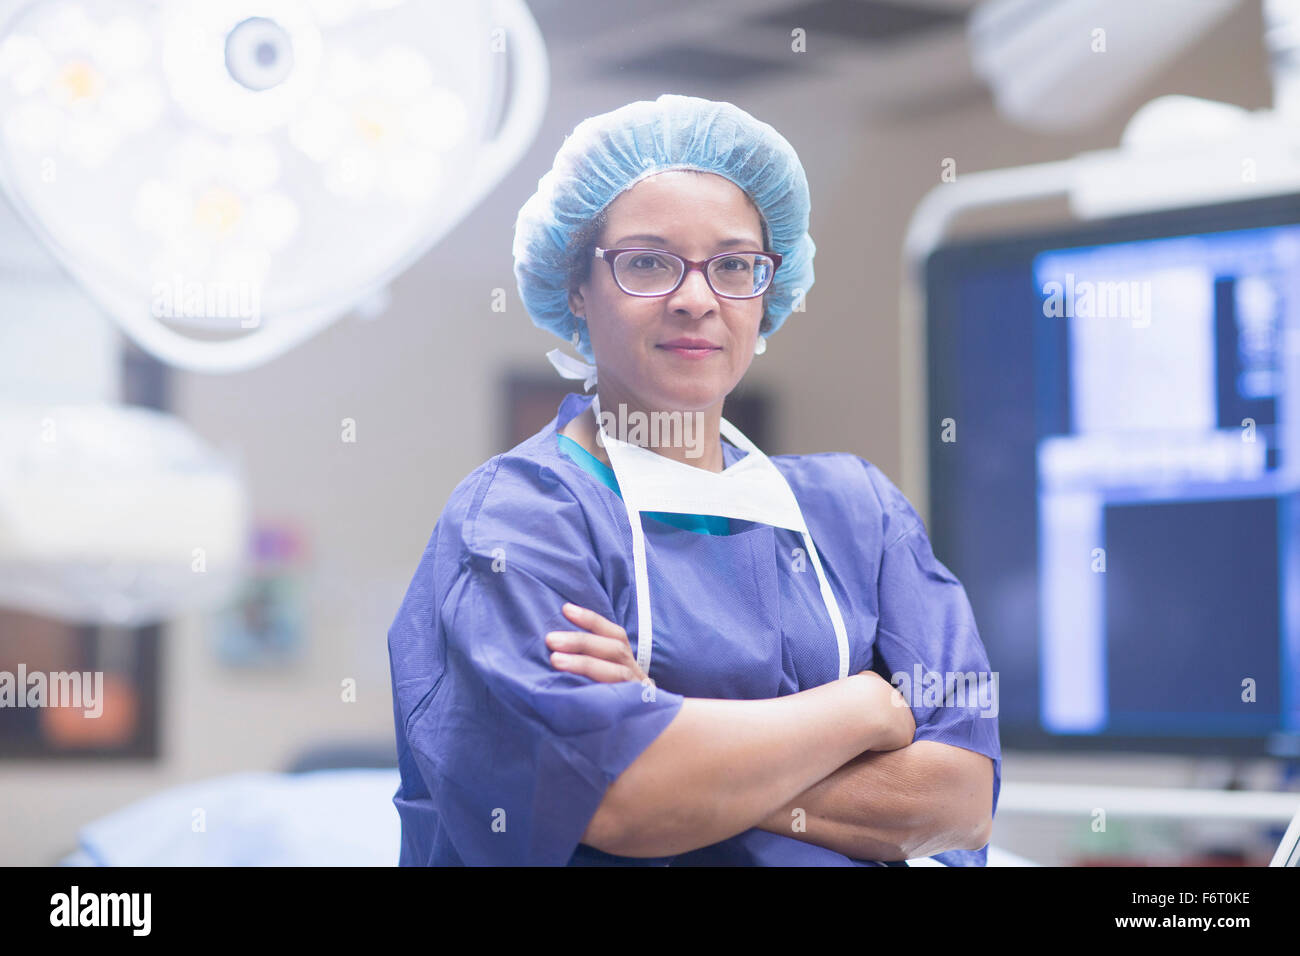 African American surgeon in operating room Banque D'Images